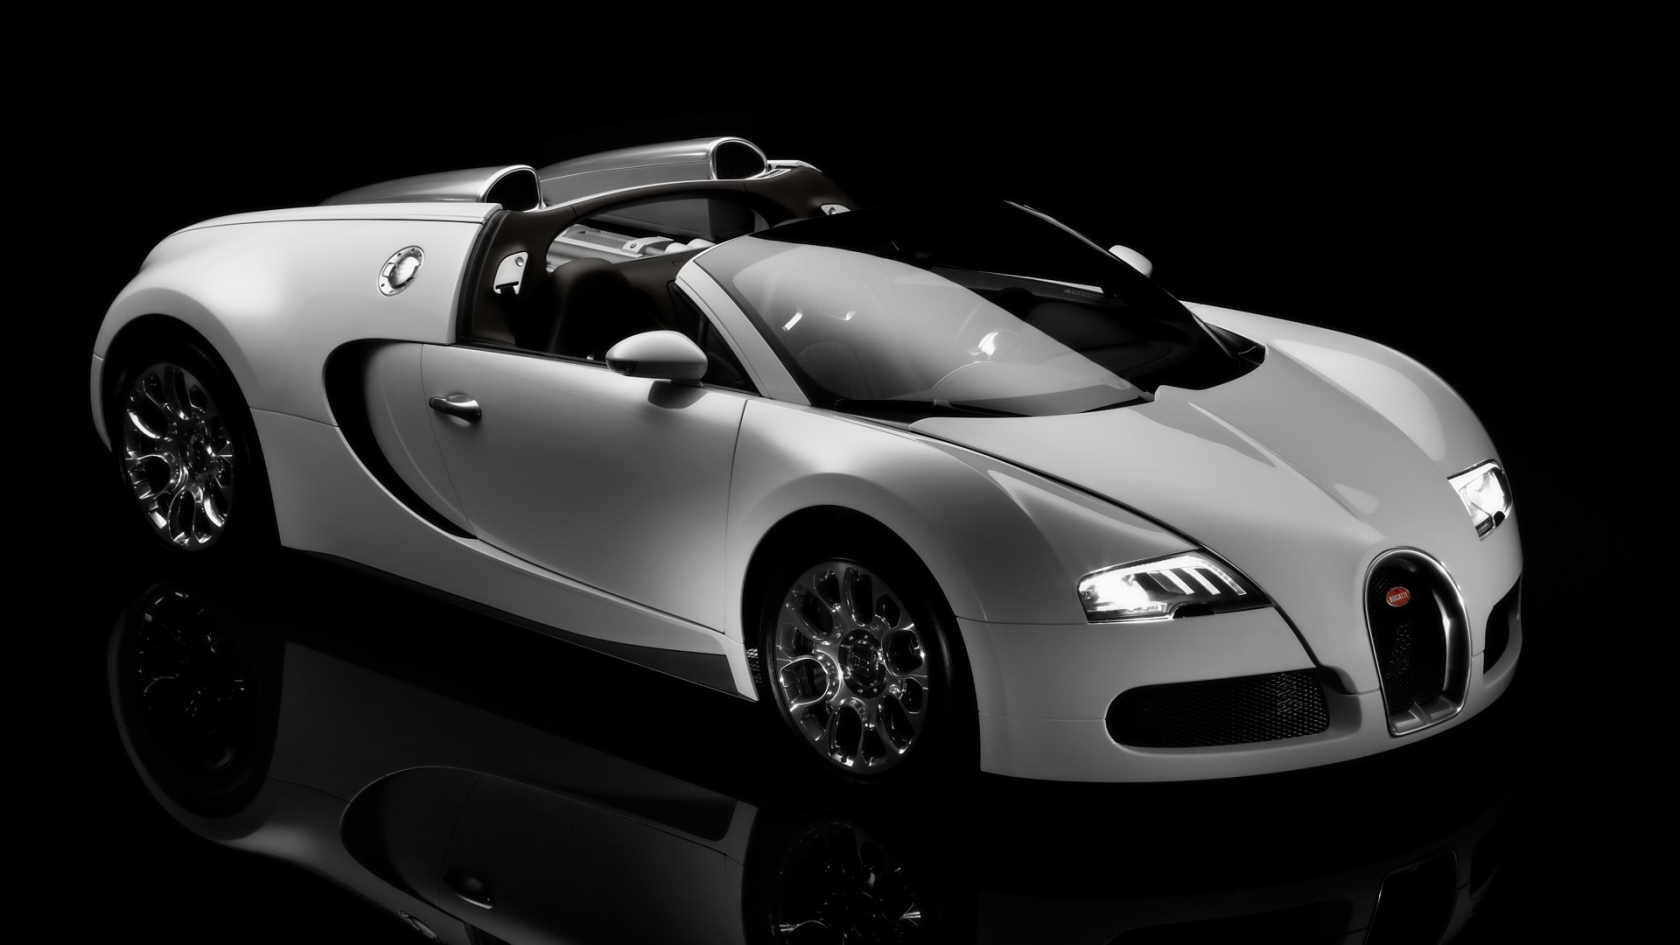 Bugatti Veyron 16.4 Grand Sport Production 2009 - Studio Front And Side for 1680 x 945 HDTV resolution